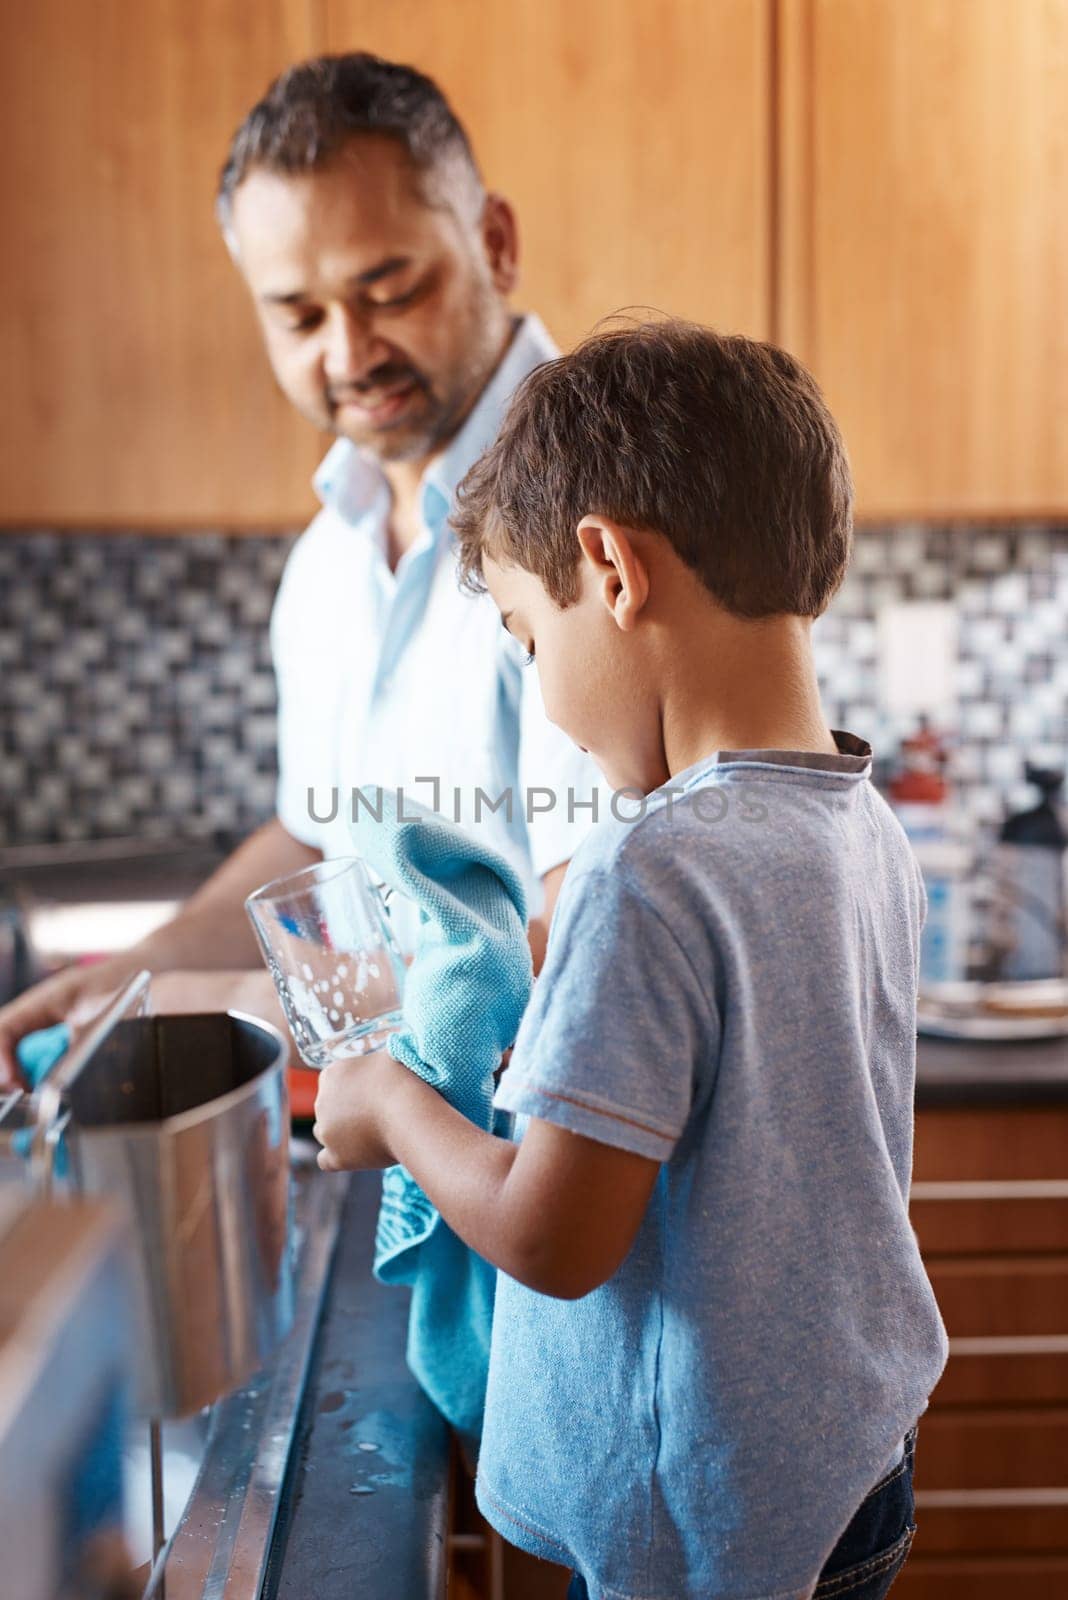 Child, help and father washing dishes in kitchen together for learning housekeeping at home. Teaching, hygiene and dad with boy kid cleaning glasses with cloth for chores and bonding at house. by YuriArcurs